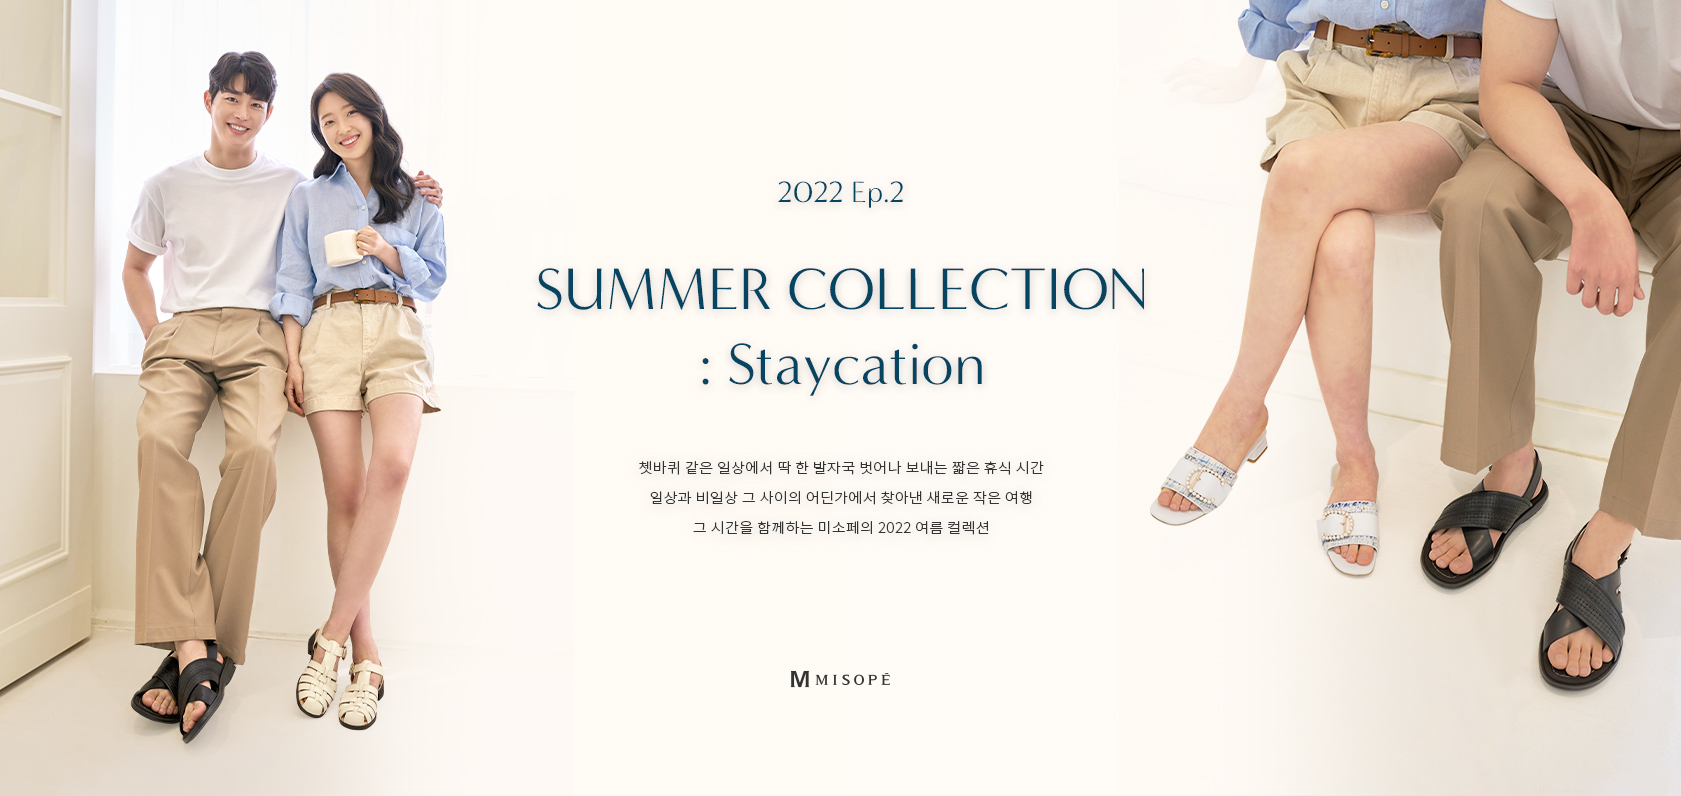 2022 SUMMER COLLECTION